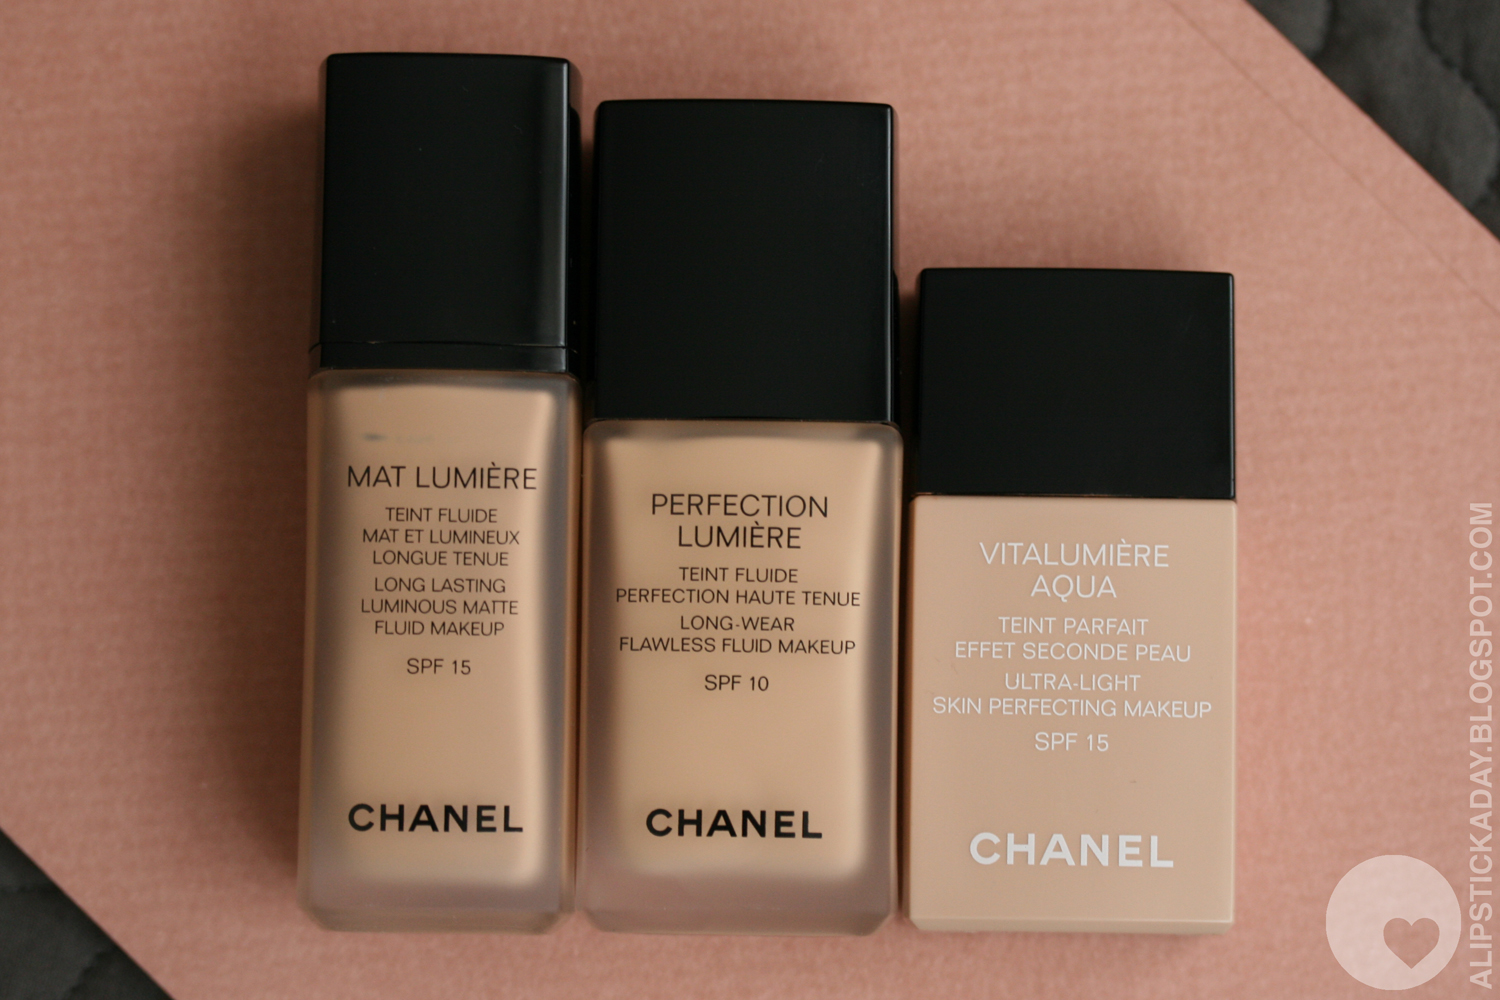 Is Chanel foundation mineral based?